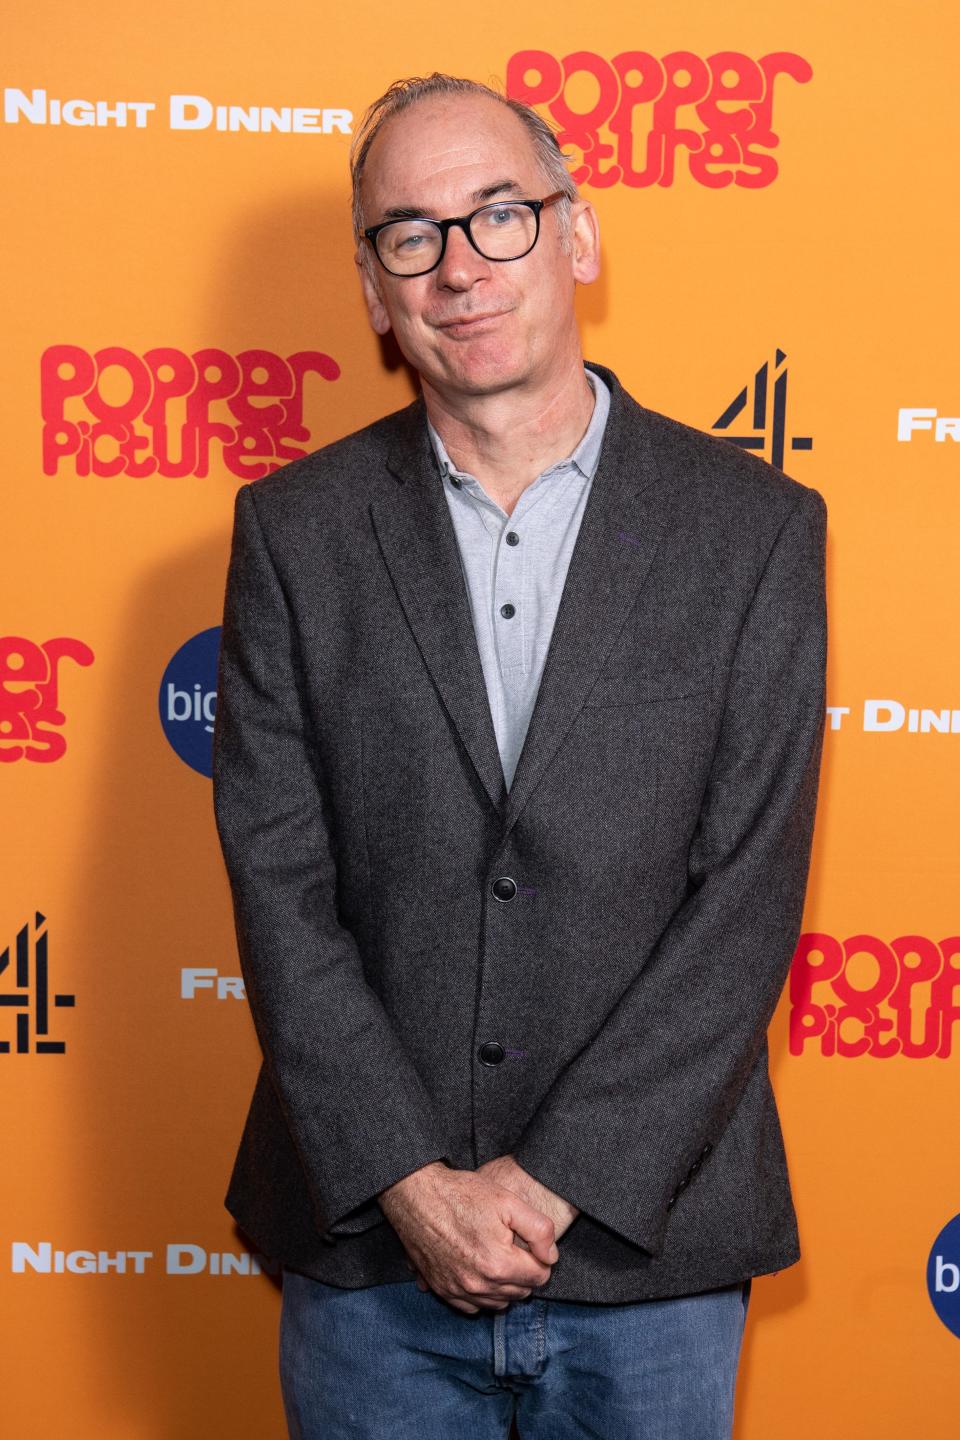 Paul Ritter attends the "Friday Night Dinner" photocall at Curzon Soho on March 9, 2020, in London.